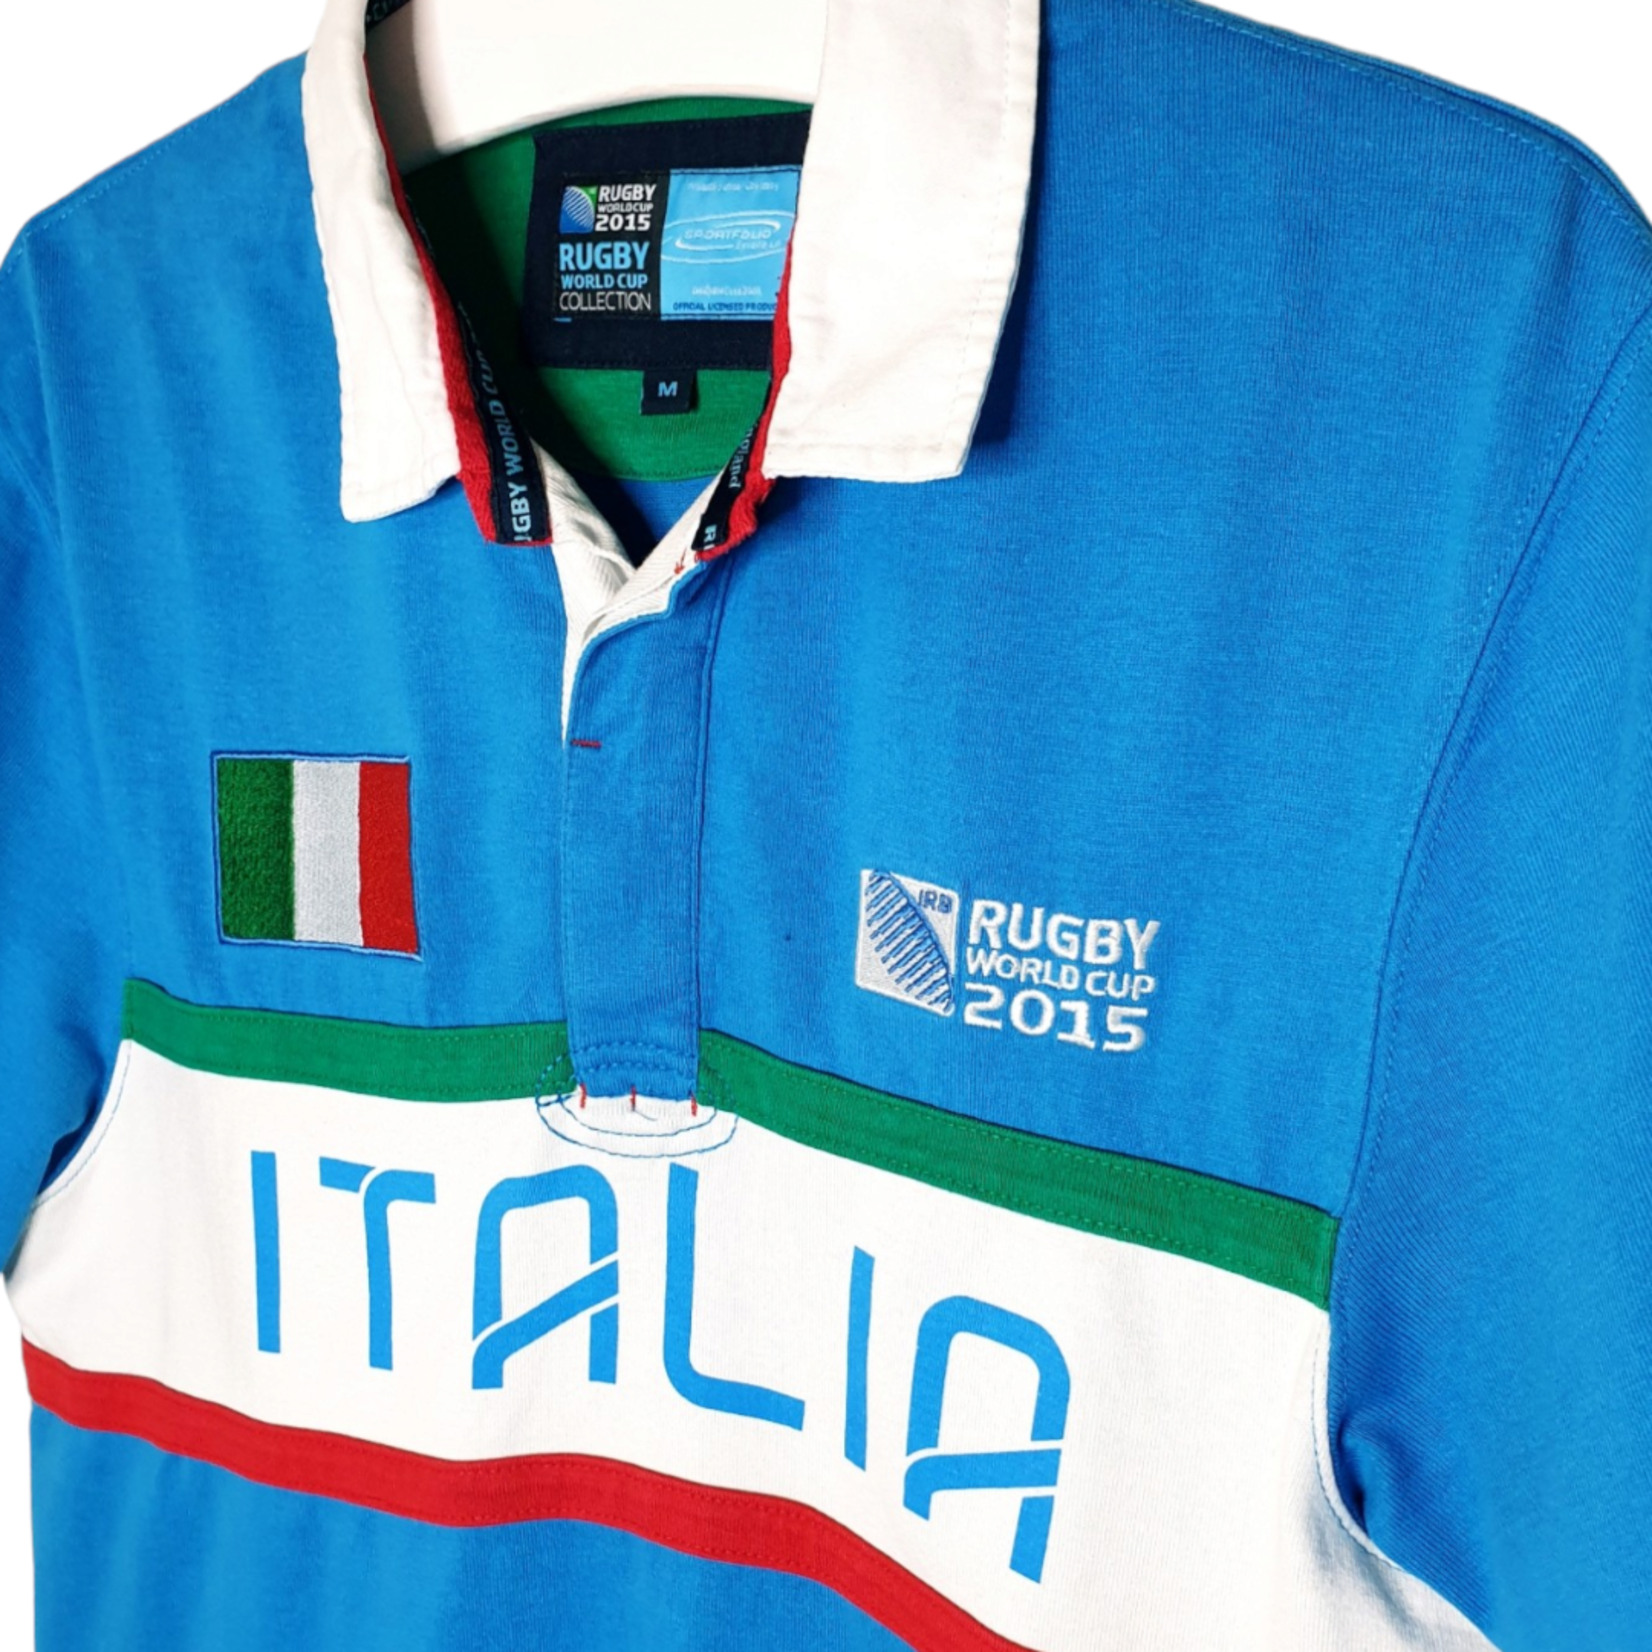 Rugby World Cup Original Rugby World Cup 2015 vintage rugby jersey Italy